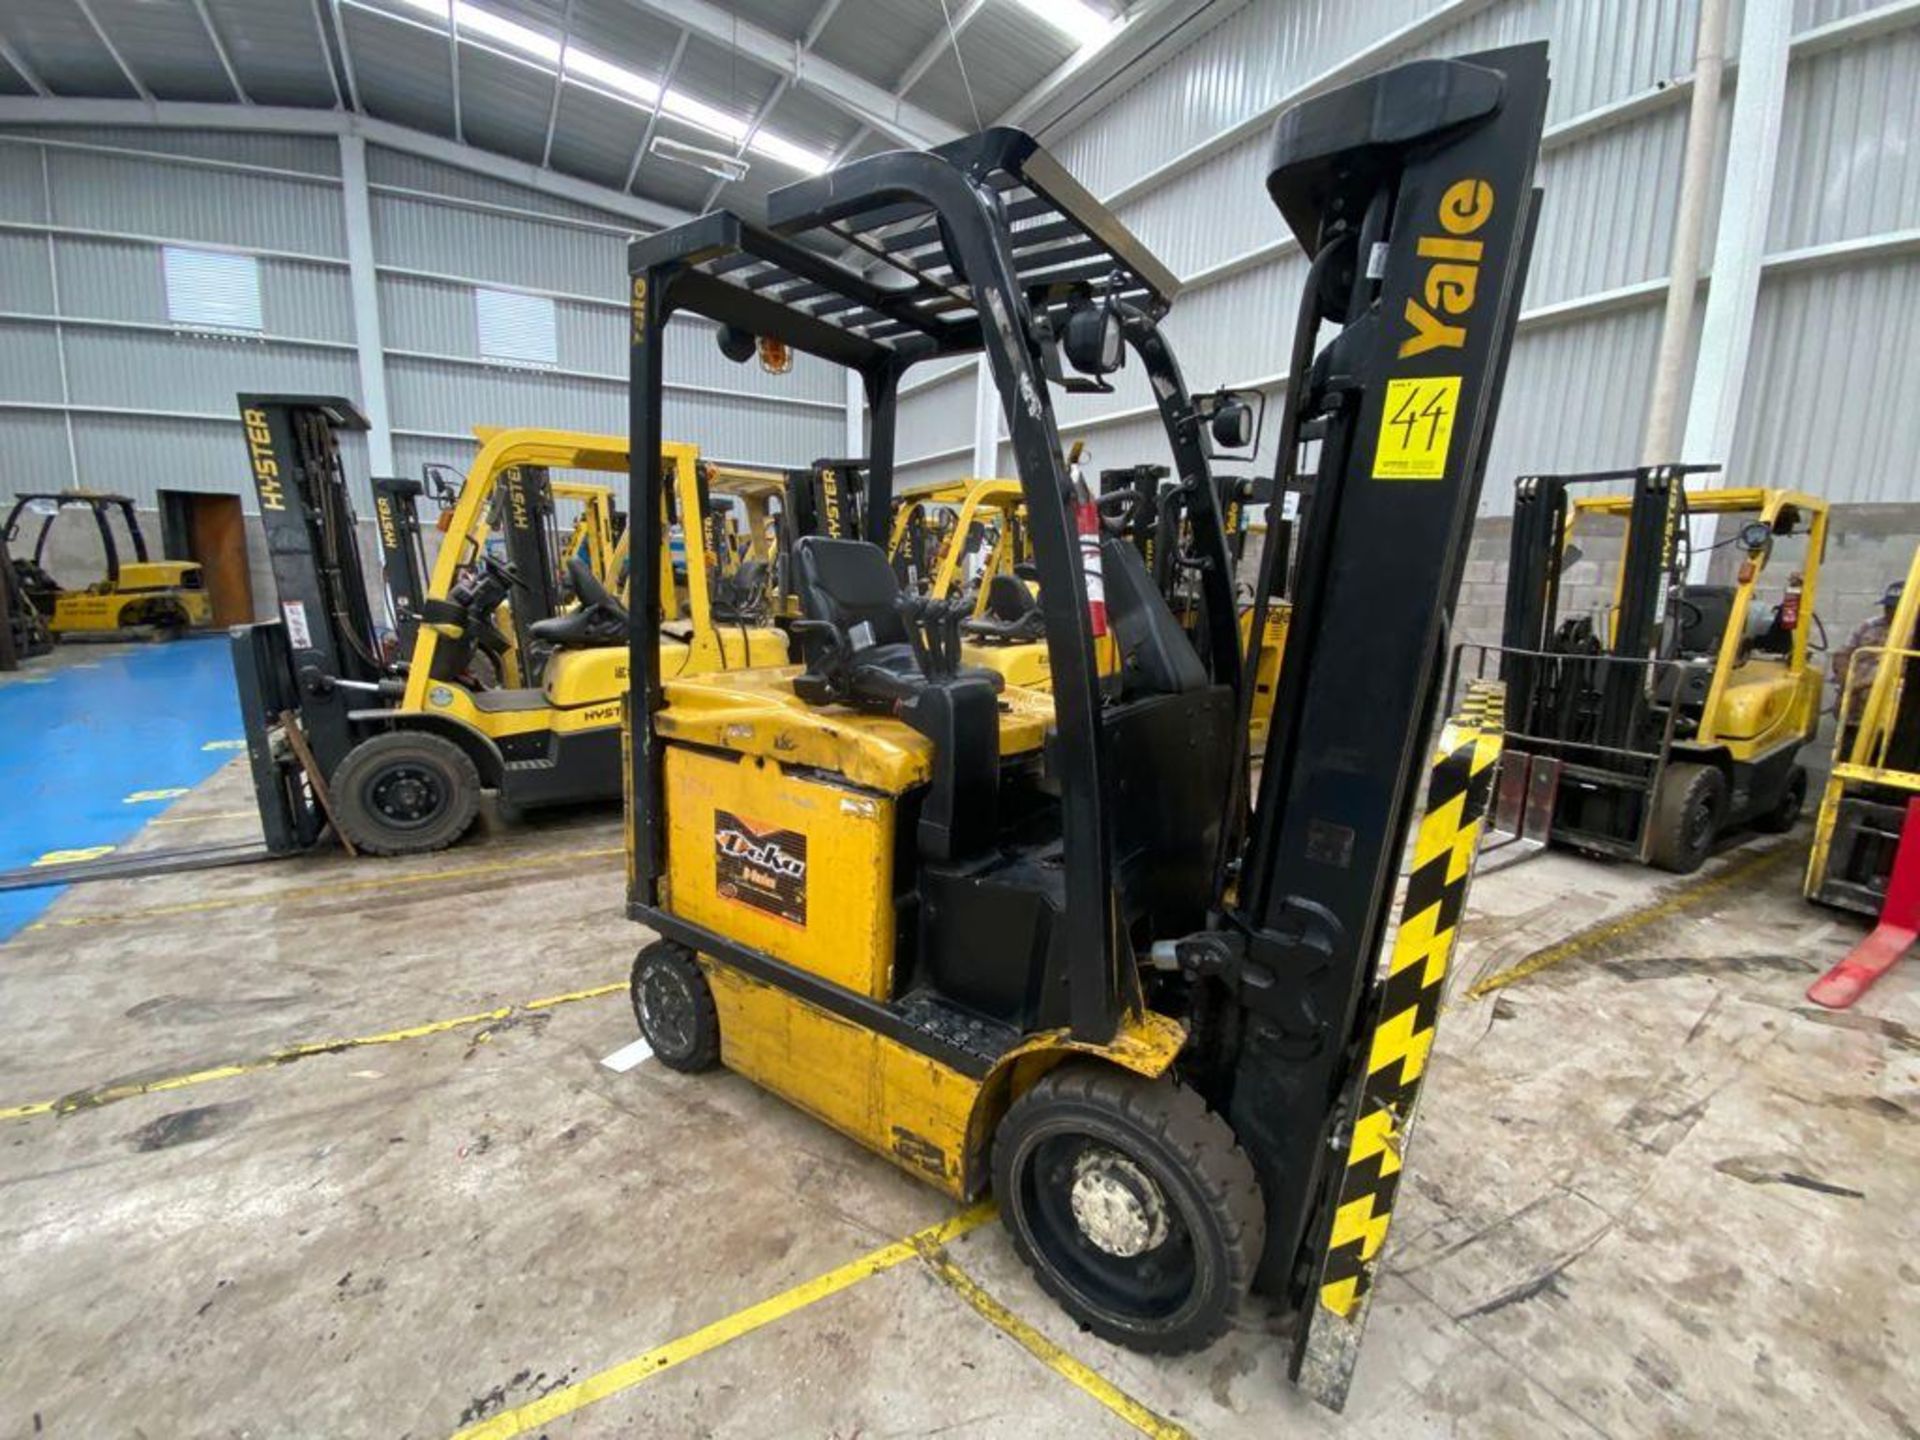 Yale Electric Forklift, Model ERC060VGN36TE088, S/N A968N17882R, Year 2017, 5800 lb capacity - Image 6 of 44